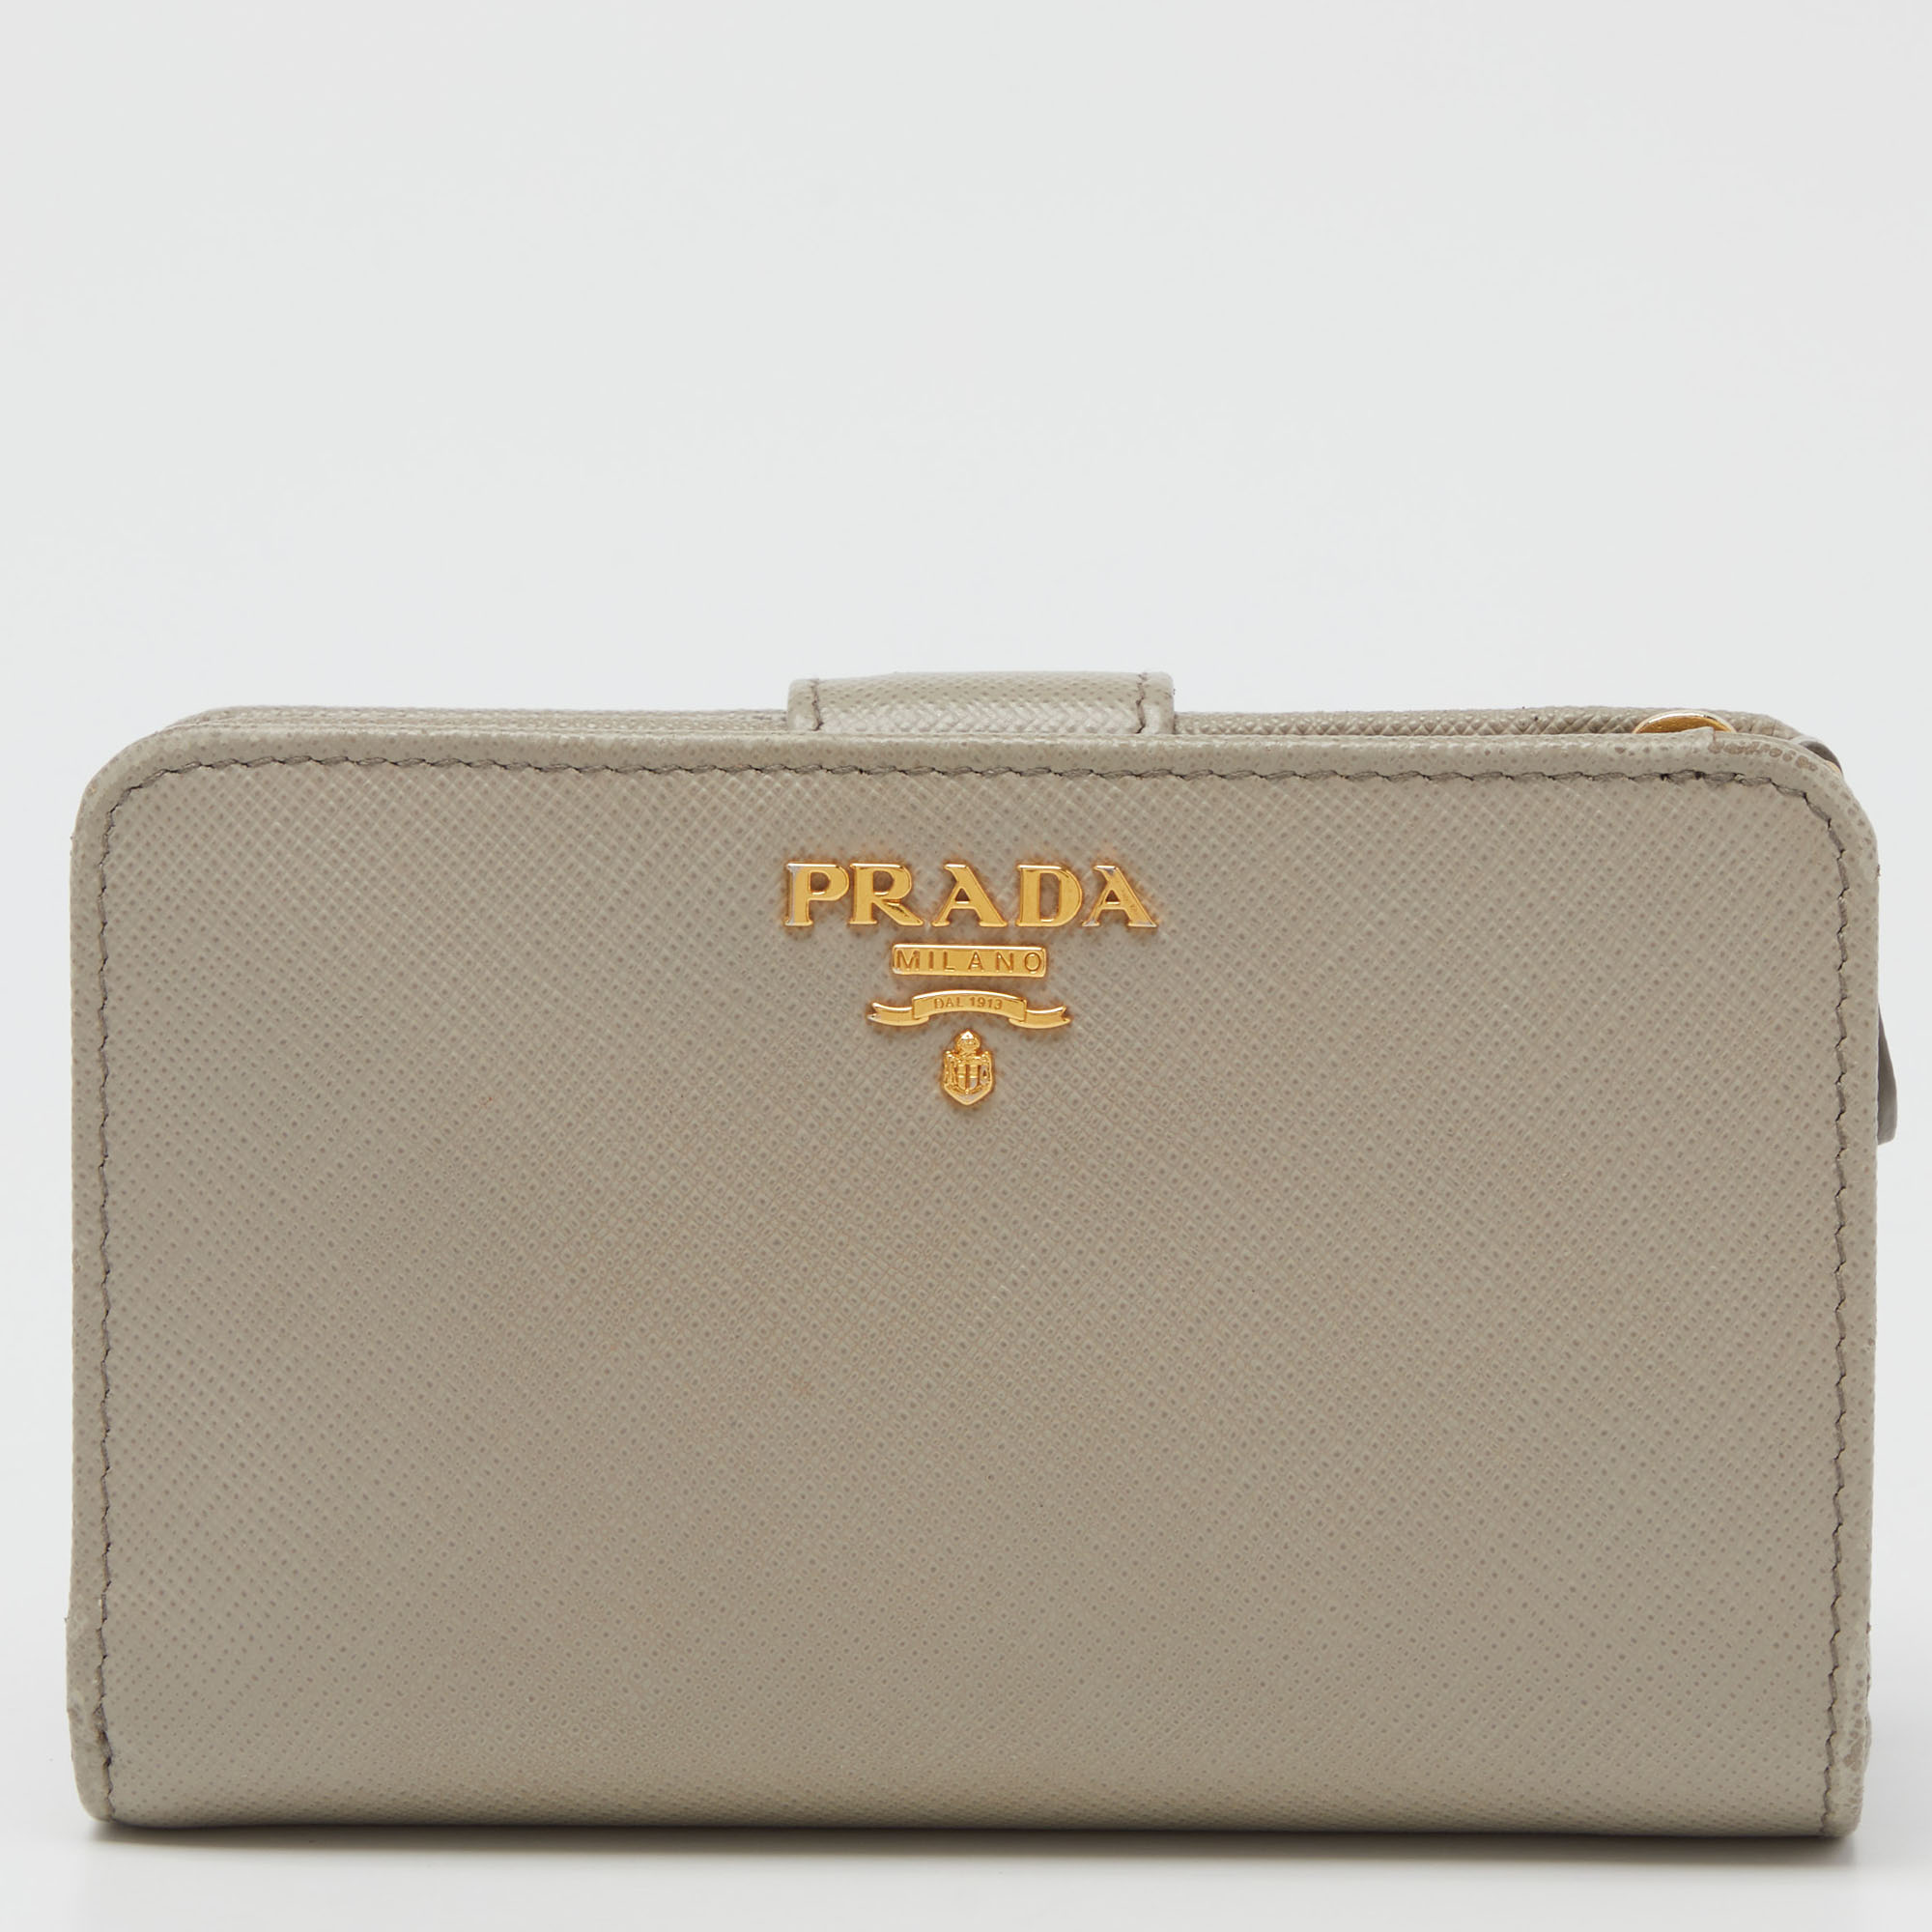 Pre-owned Prada Grey Saffiano Leather Flap French Wallet